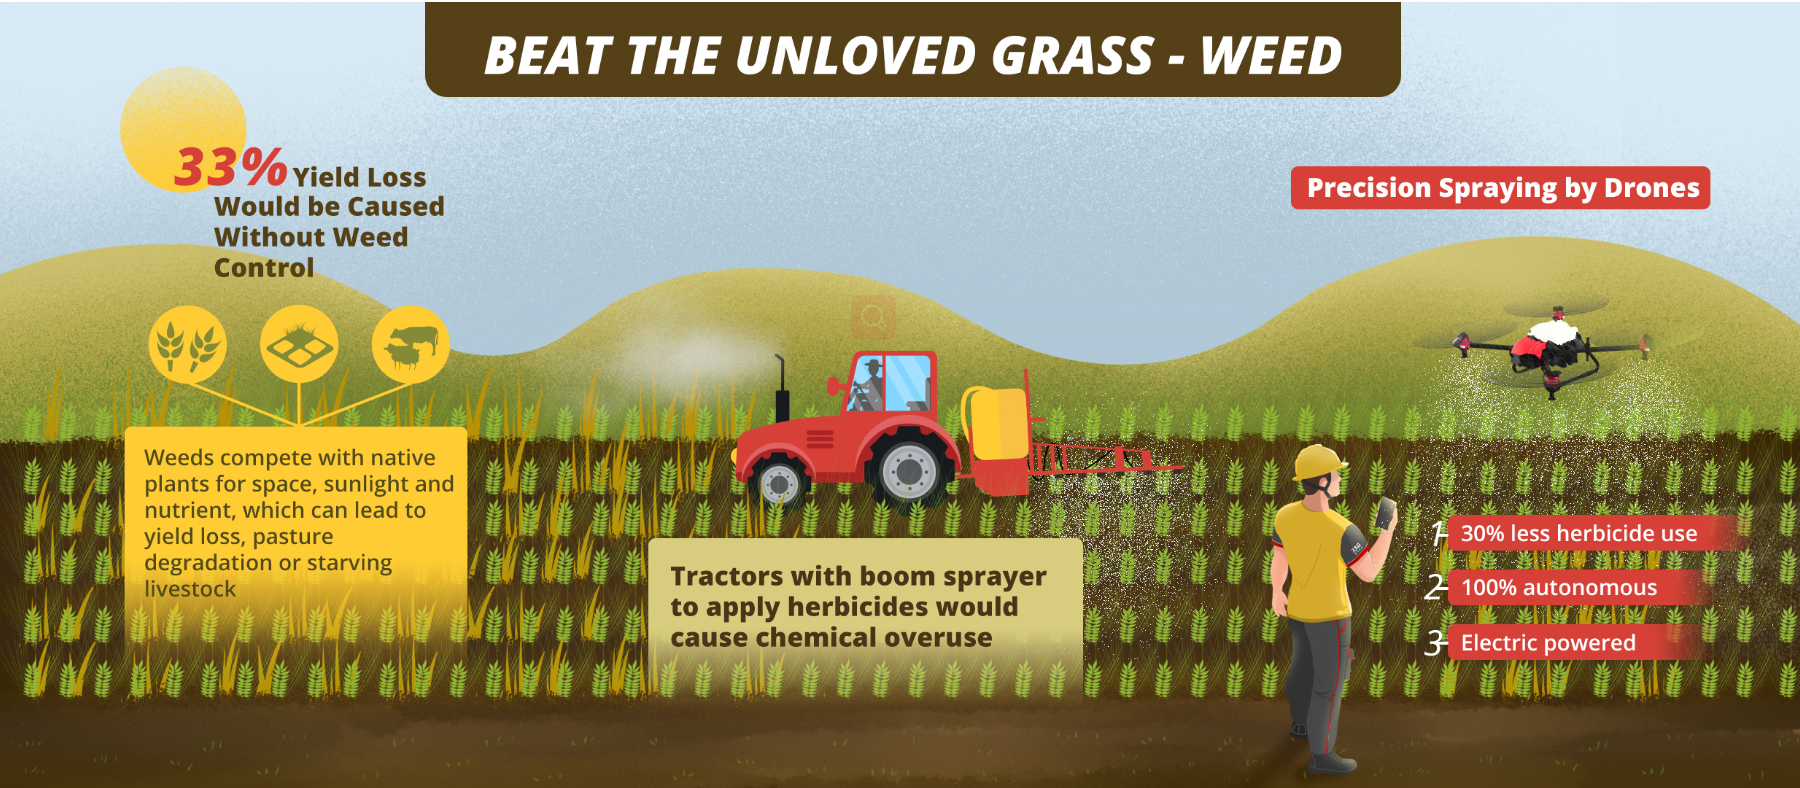 Beat the unloved grass - weed